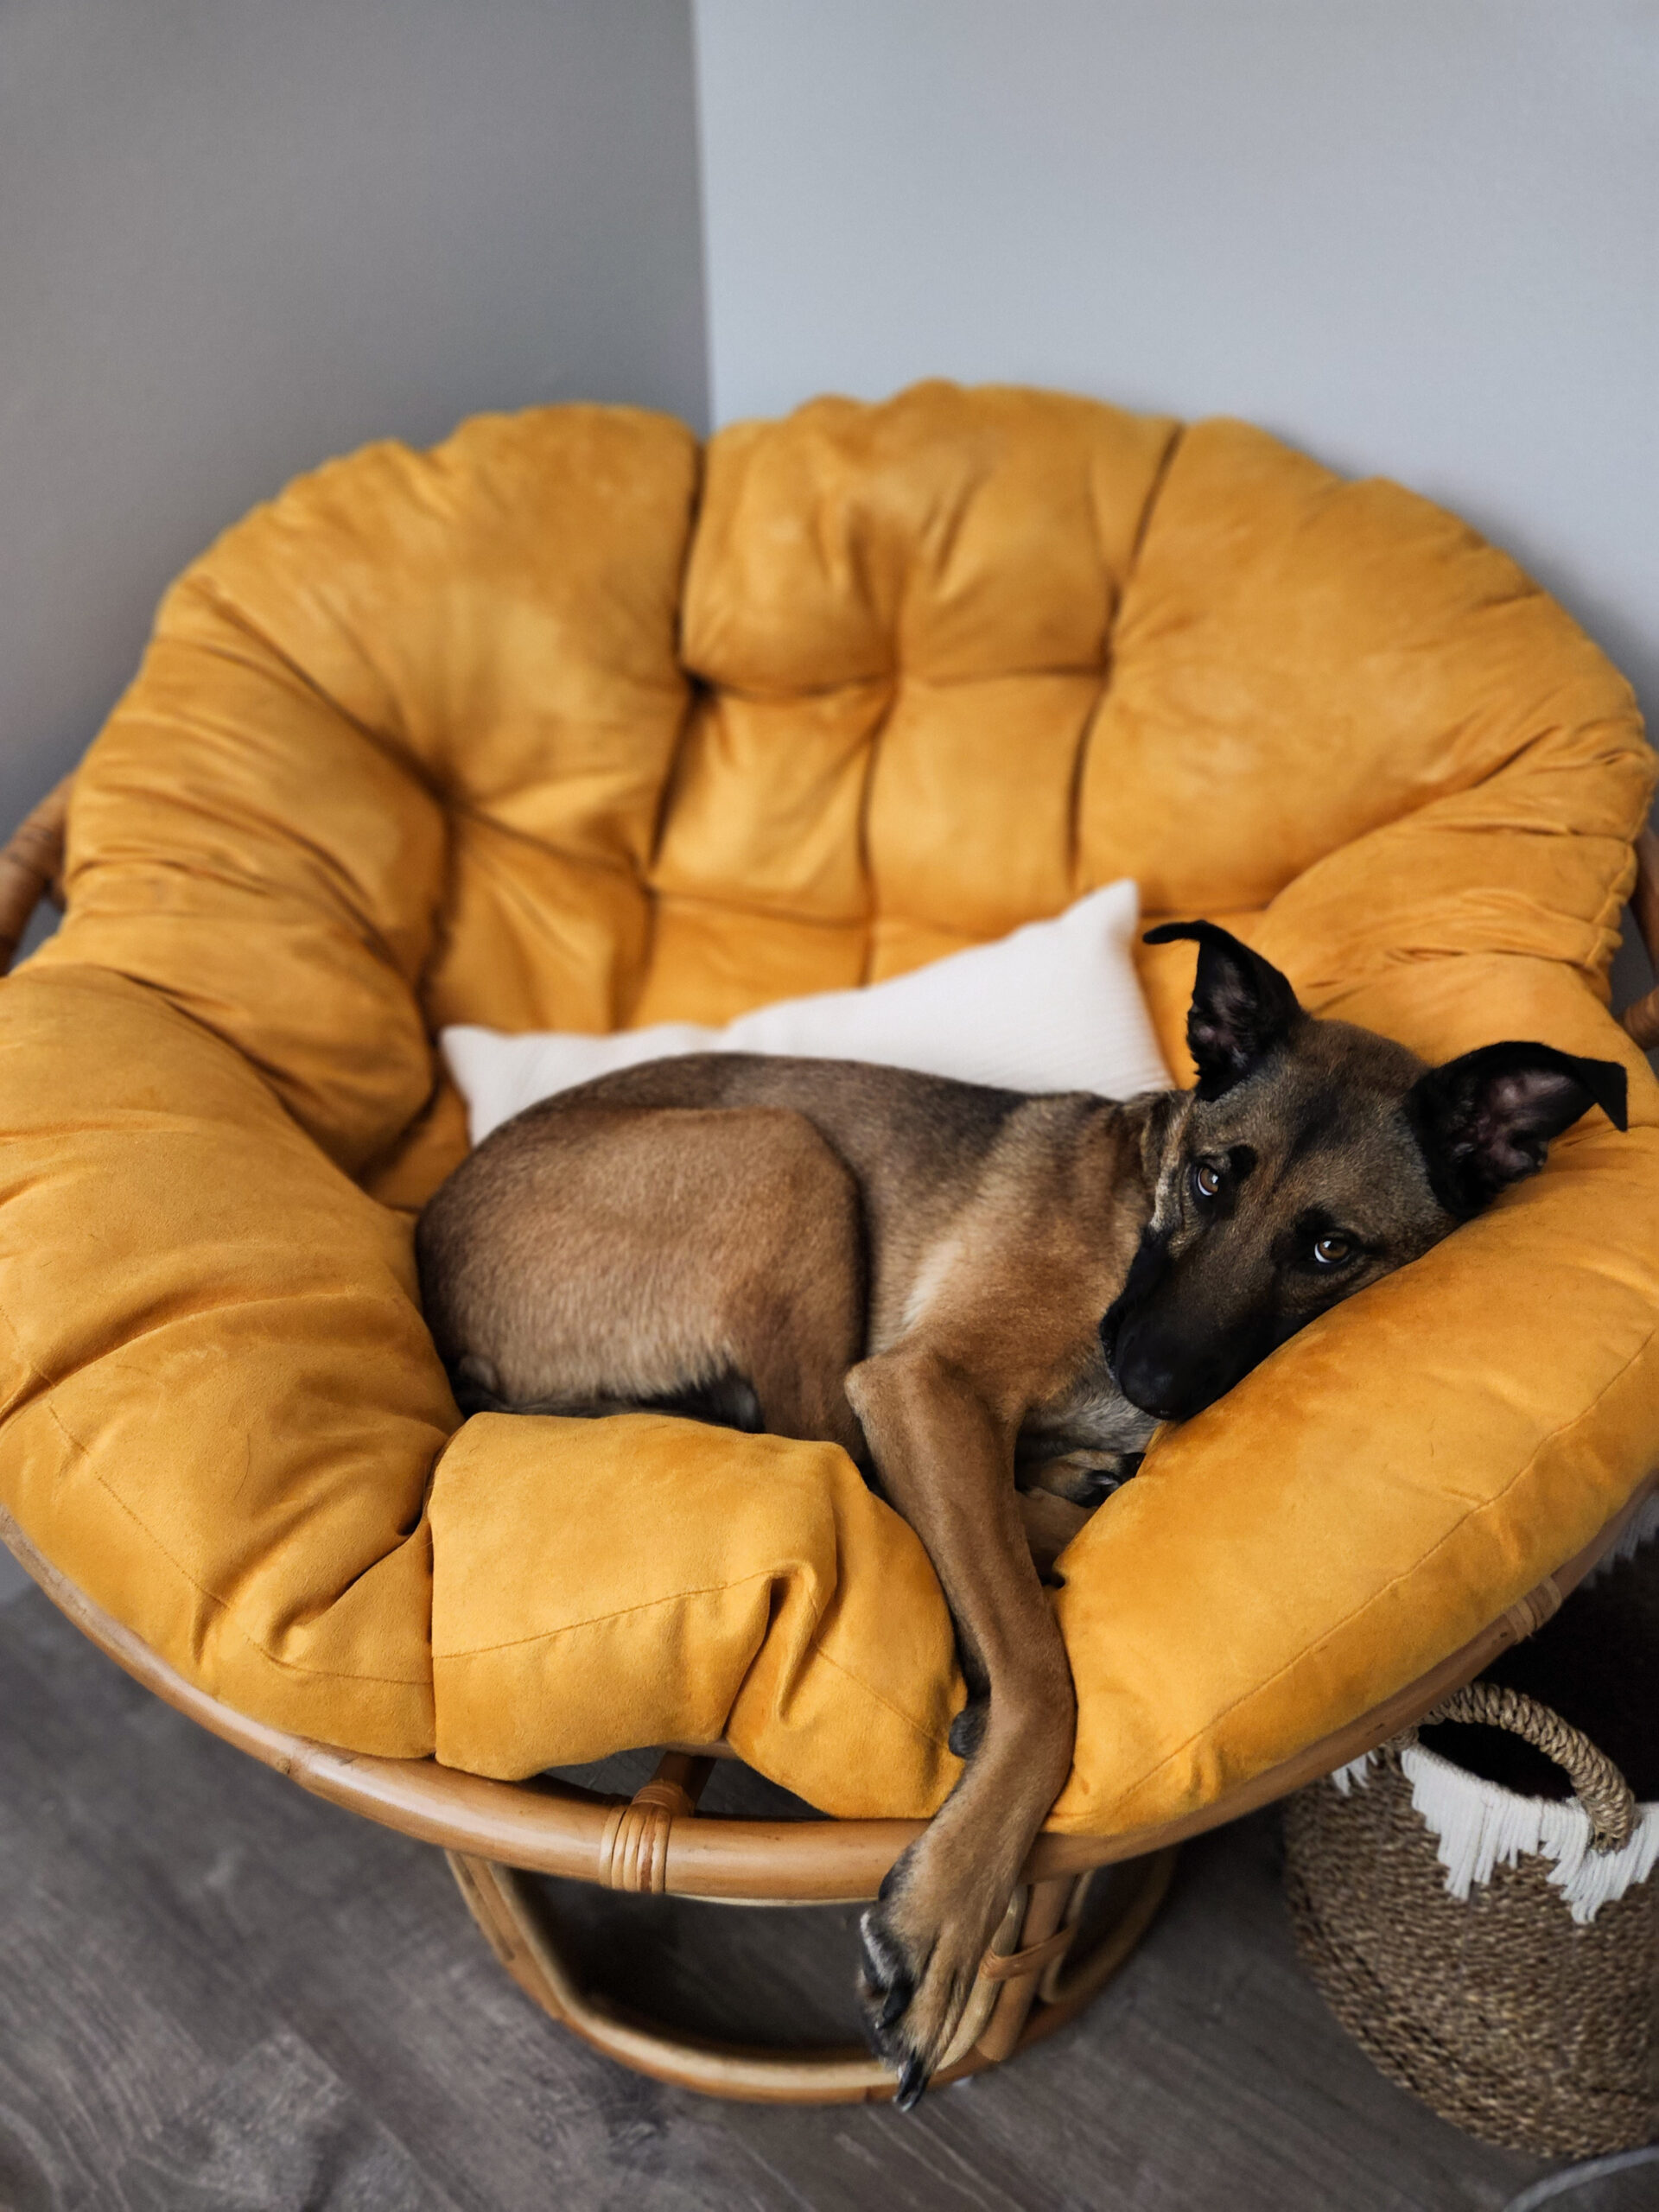 A German Shepherd mix black and tan dog lounges in a papasan chair with a marigold colored cushion while looking up at the camera